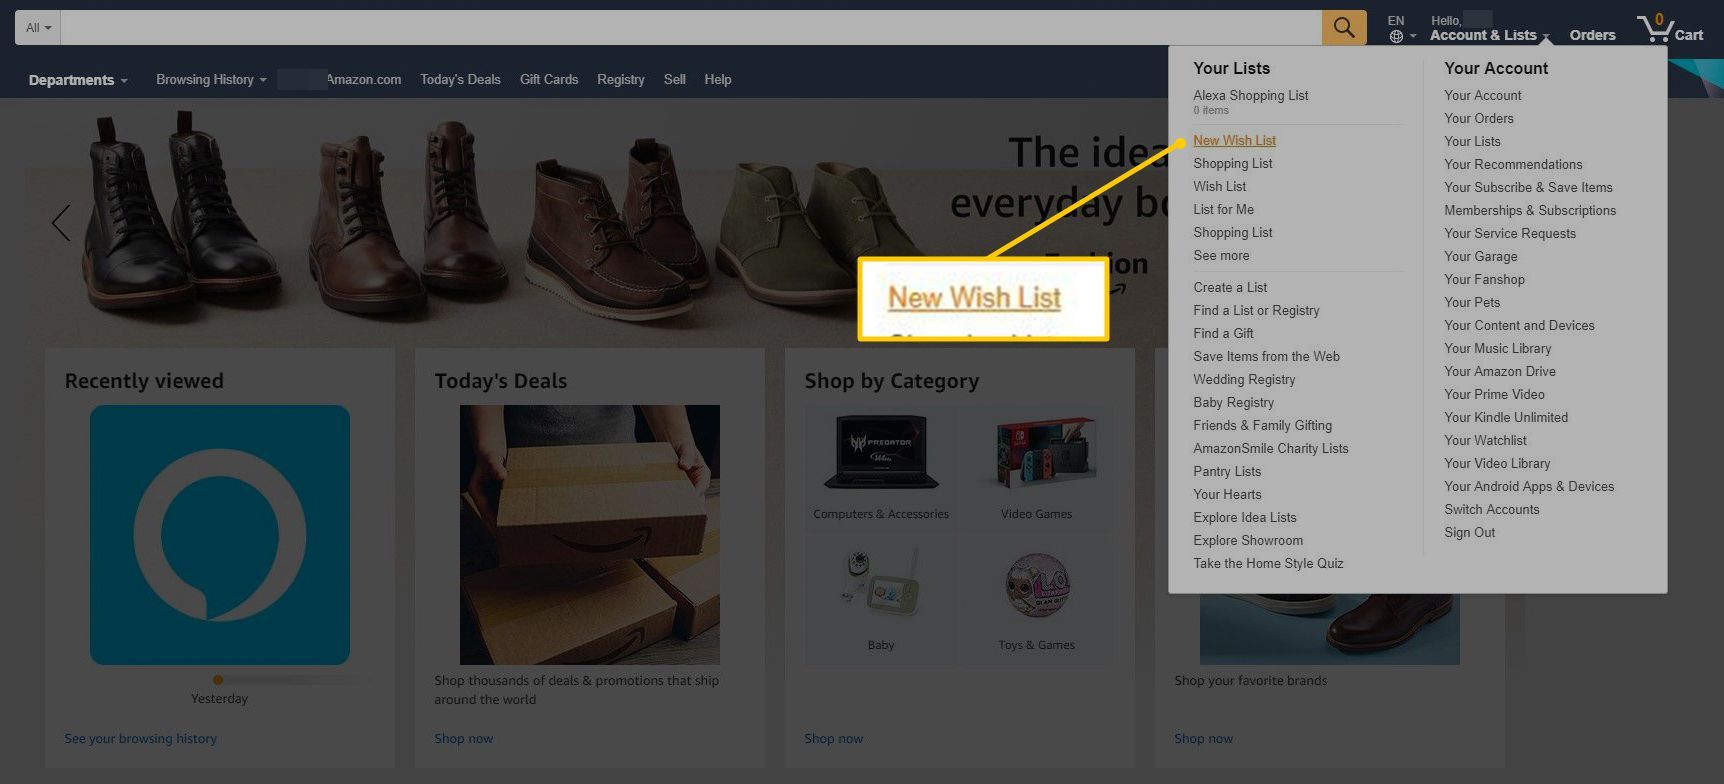 How to find amazon wish lists